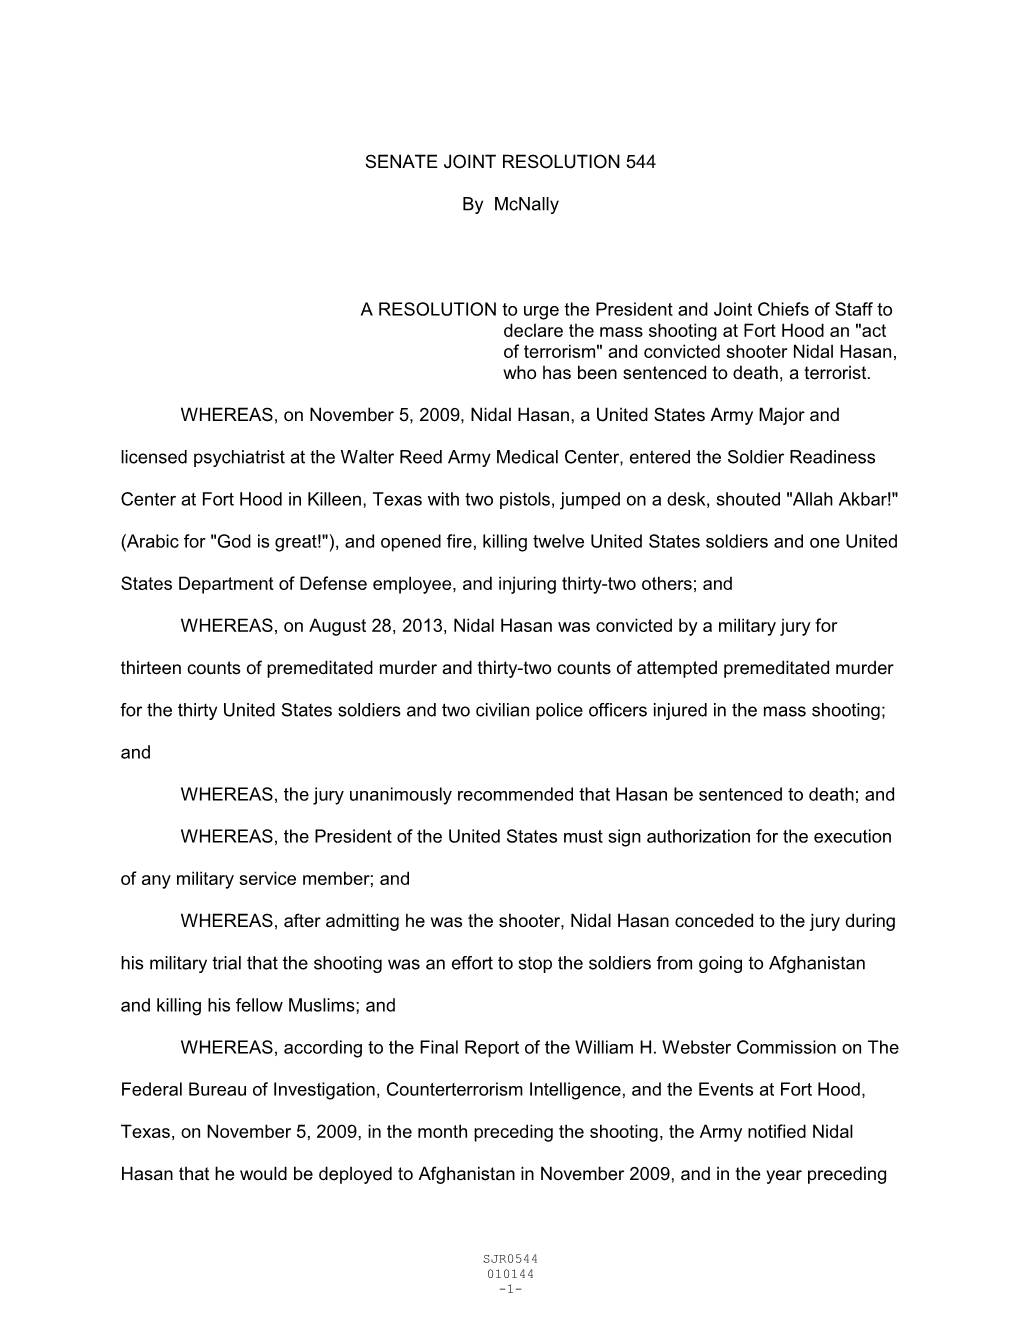 SENATE JOINT RESOLUTION 544 by Mcnally a RESOLUTION To